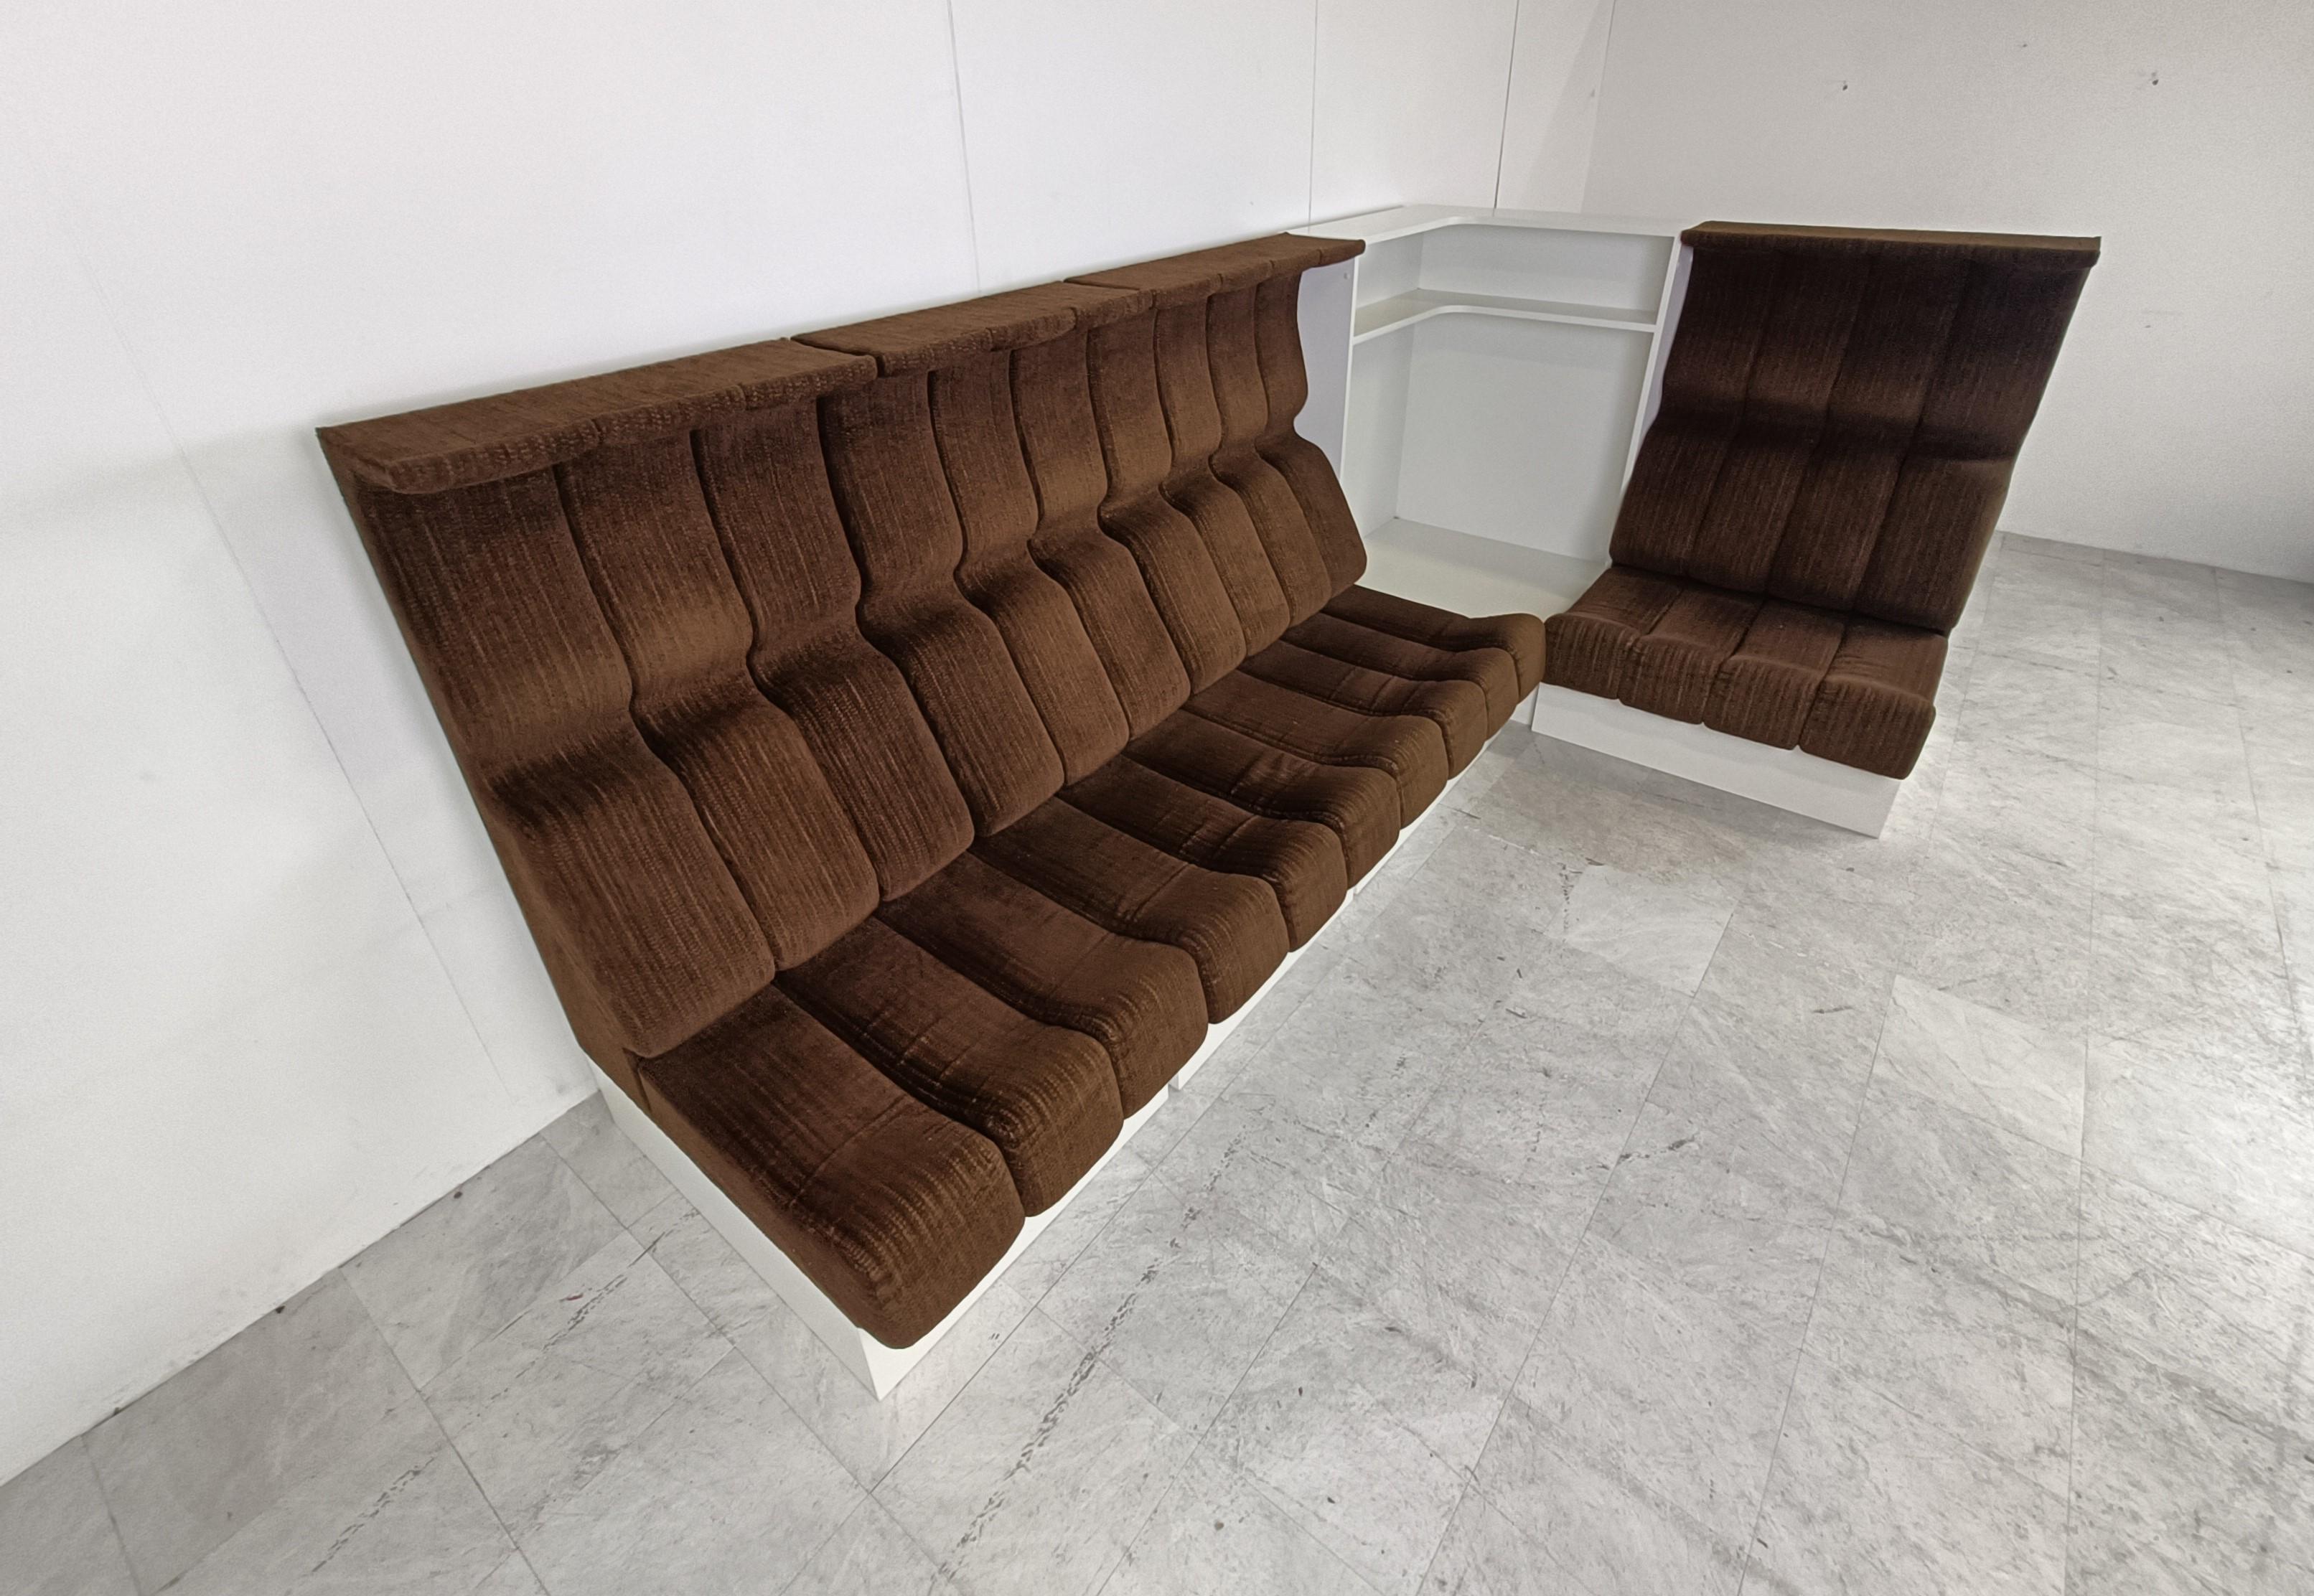 Space Age Sofa by Interlübke, 1970s For Sale 4